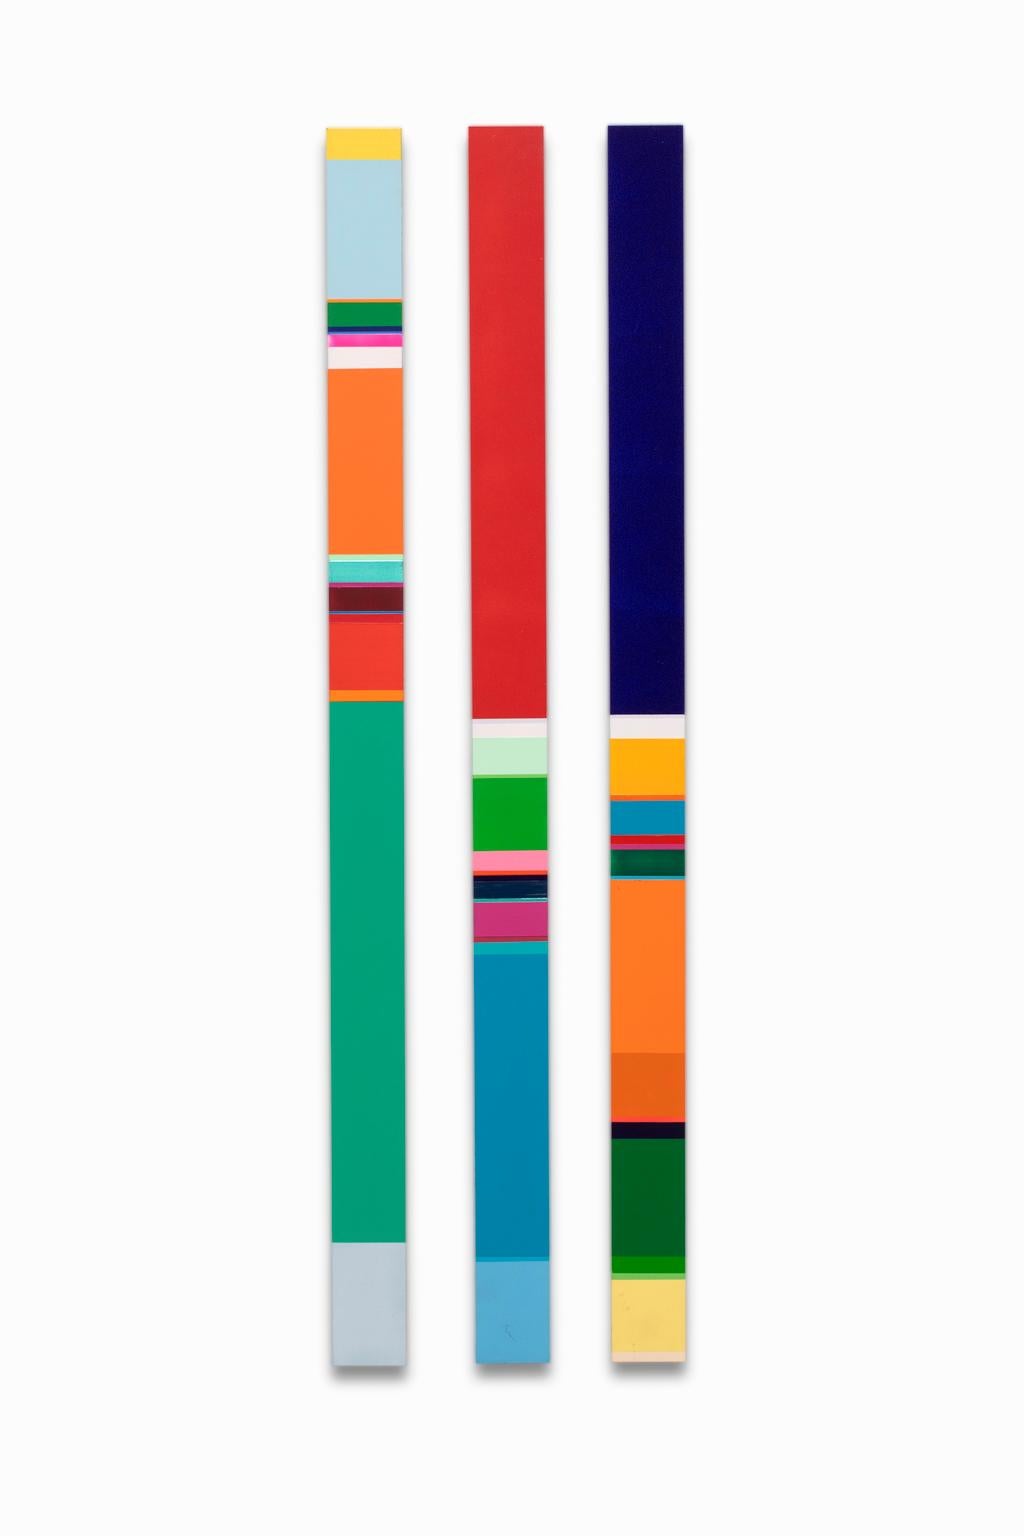 SALE ONE WEEK ONLY

"Untitled" by Nicholas Bodde depicts vibrant layers of color on narrow aluminum strips. These pieces are interchangeable and can be hung in various ways. Each is signed on the verso and was created in 2013. All three are sold as